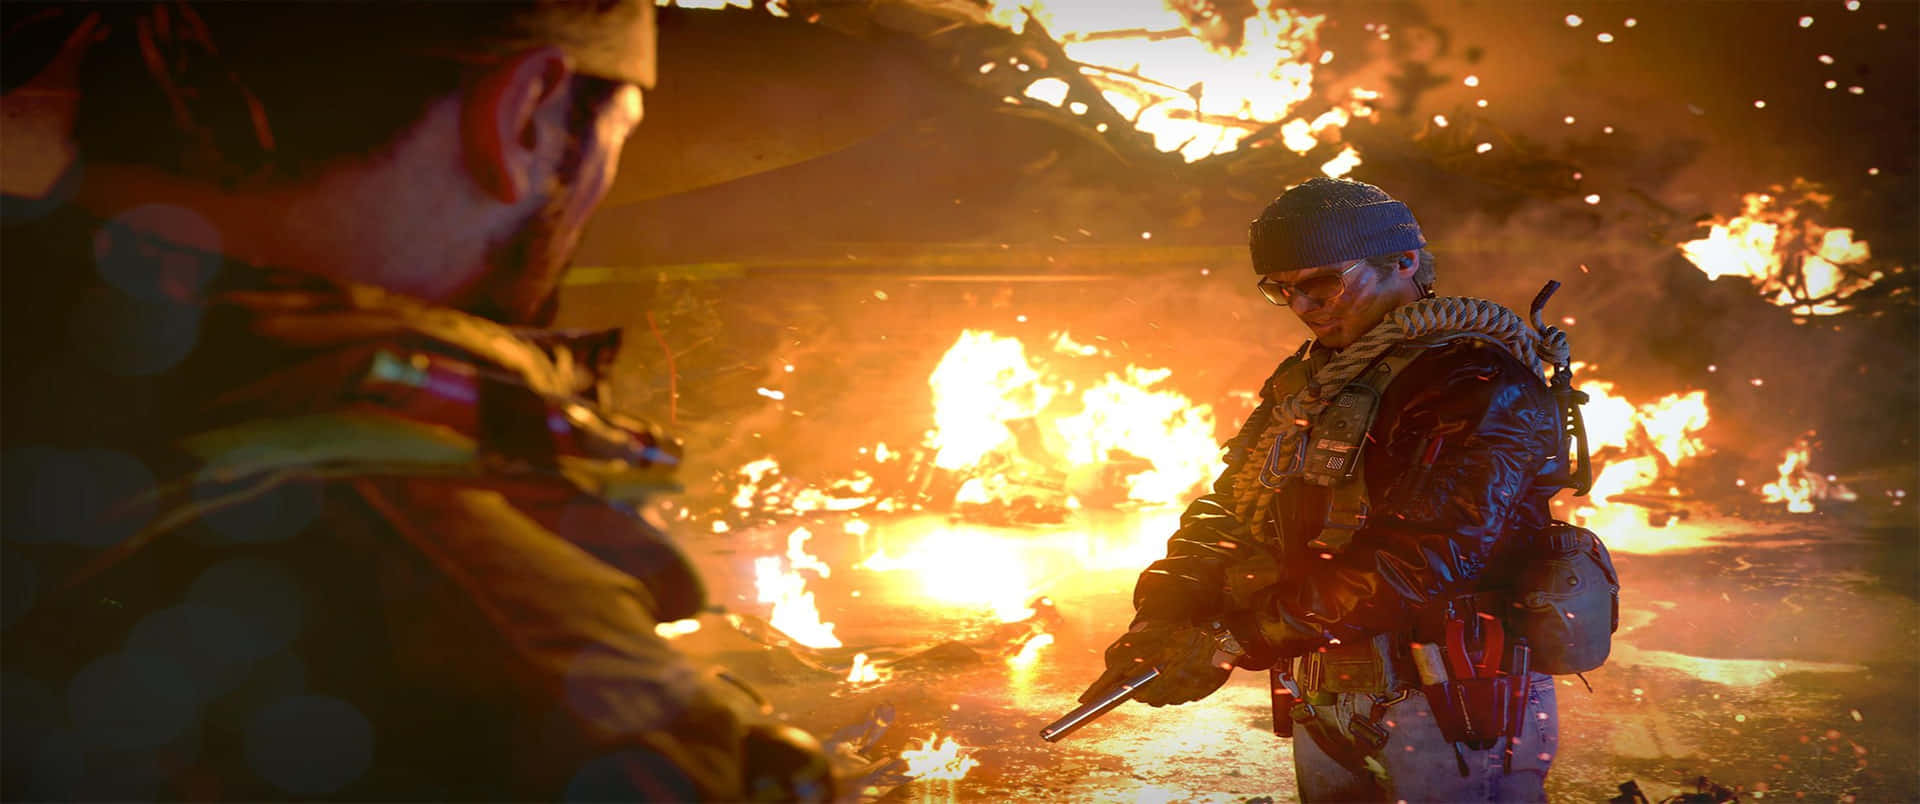 Intense Battle Scene from Call of Duty: Black Ops Cold War at 3440x1440p Resolution